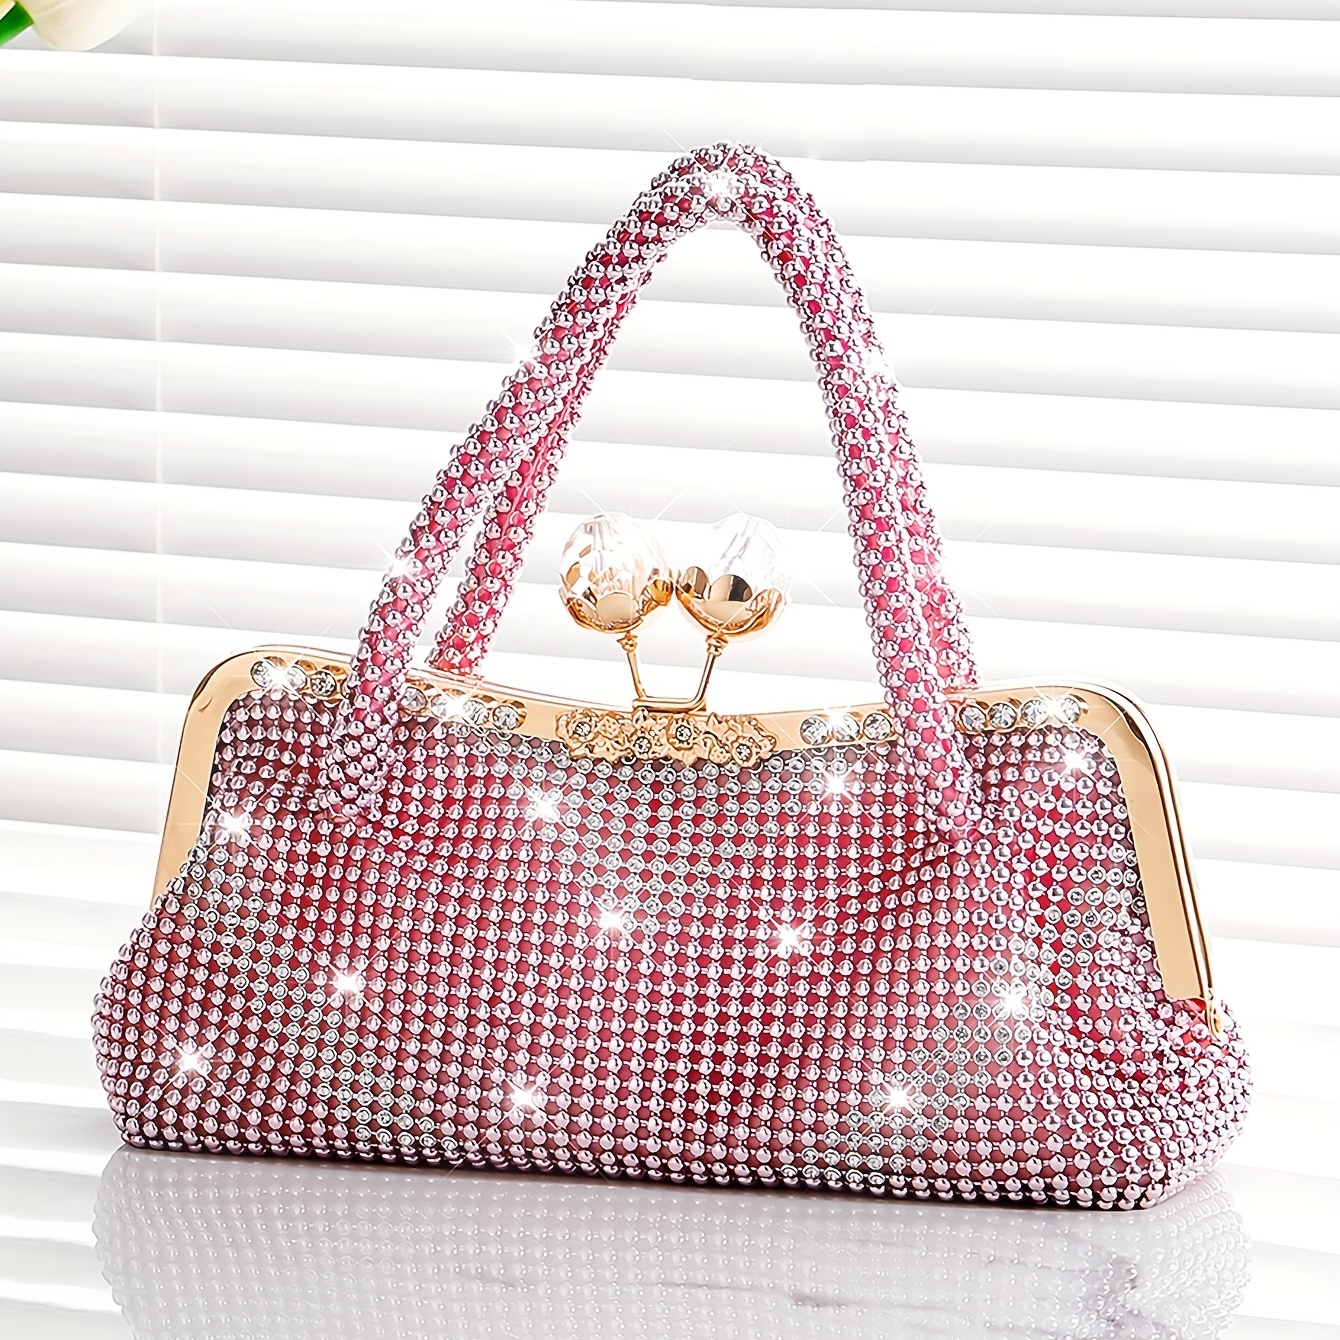 Casual Women Party Clutch Purse White Pearl Evening Bag, $39.98